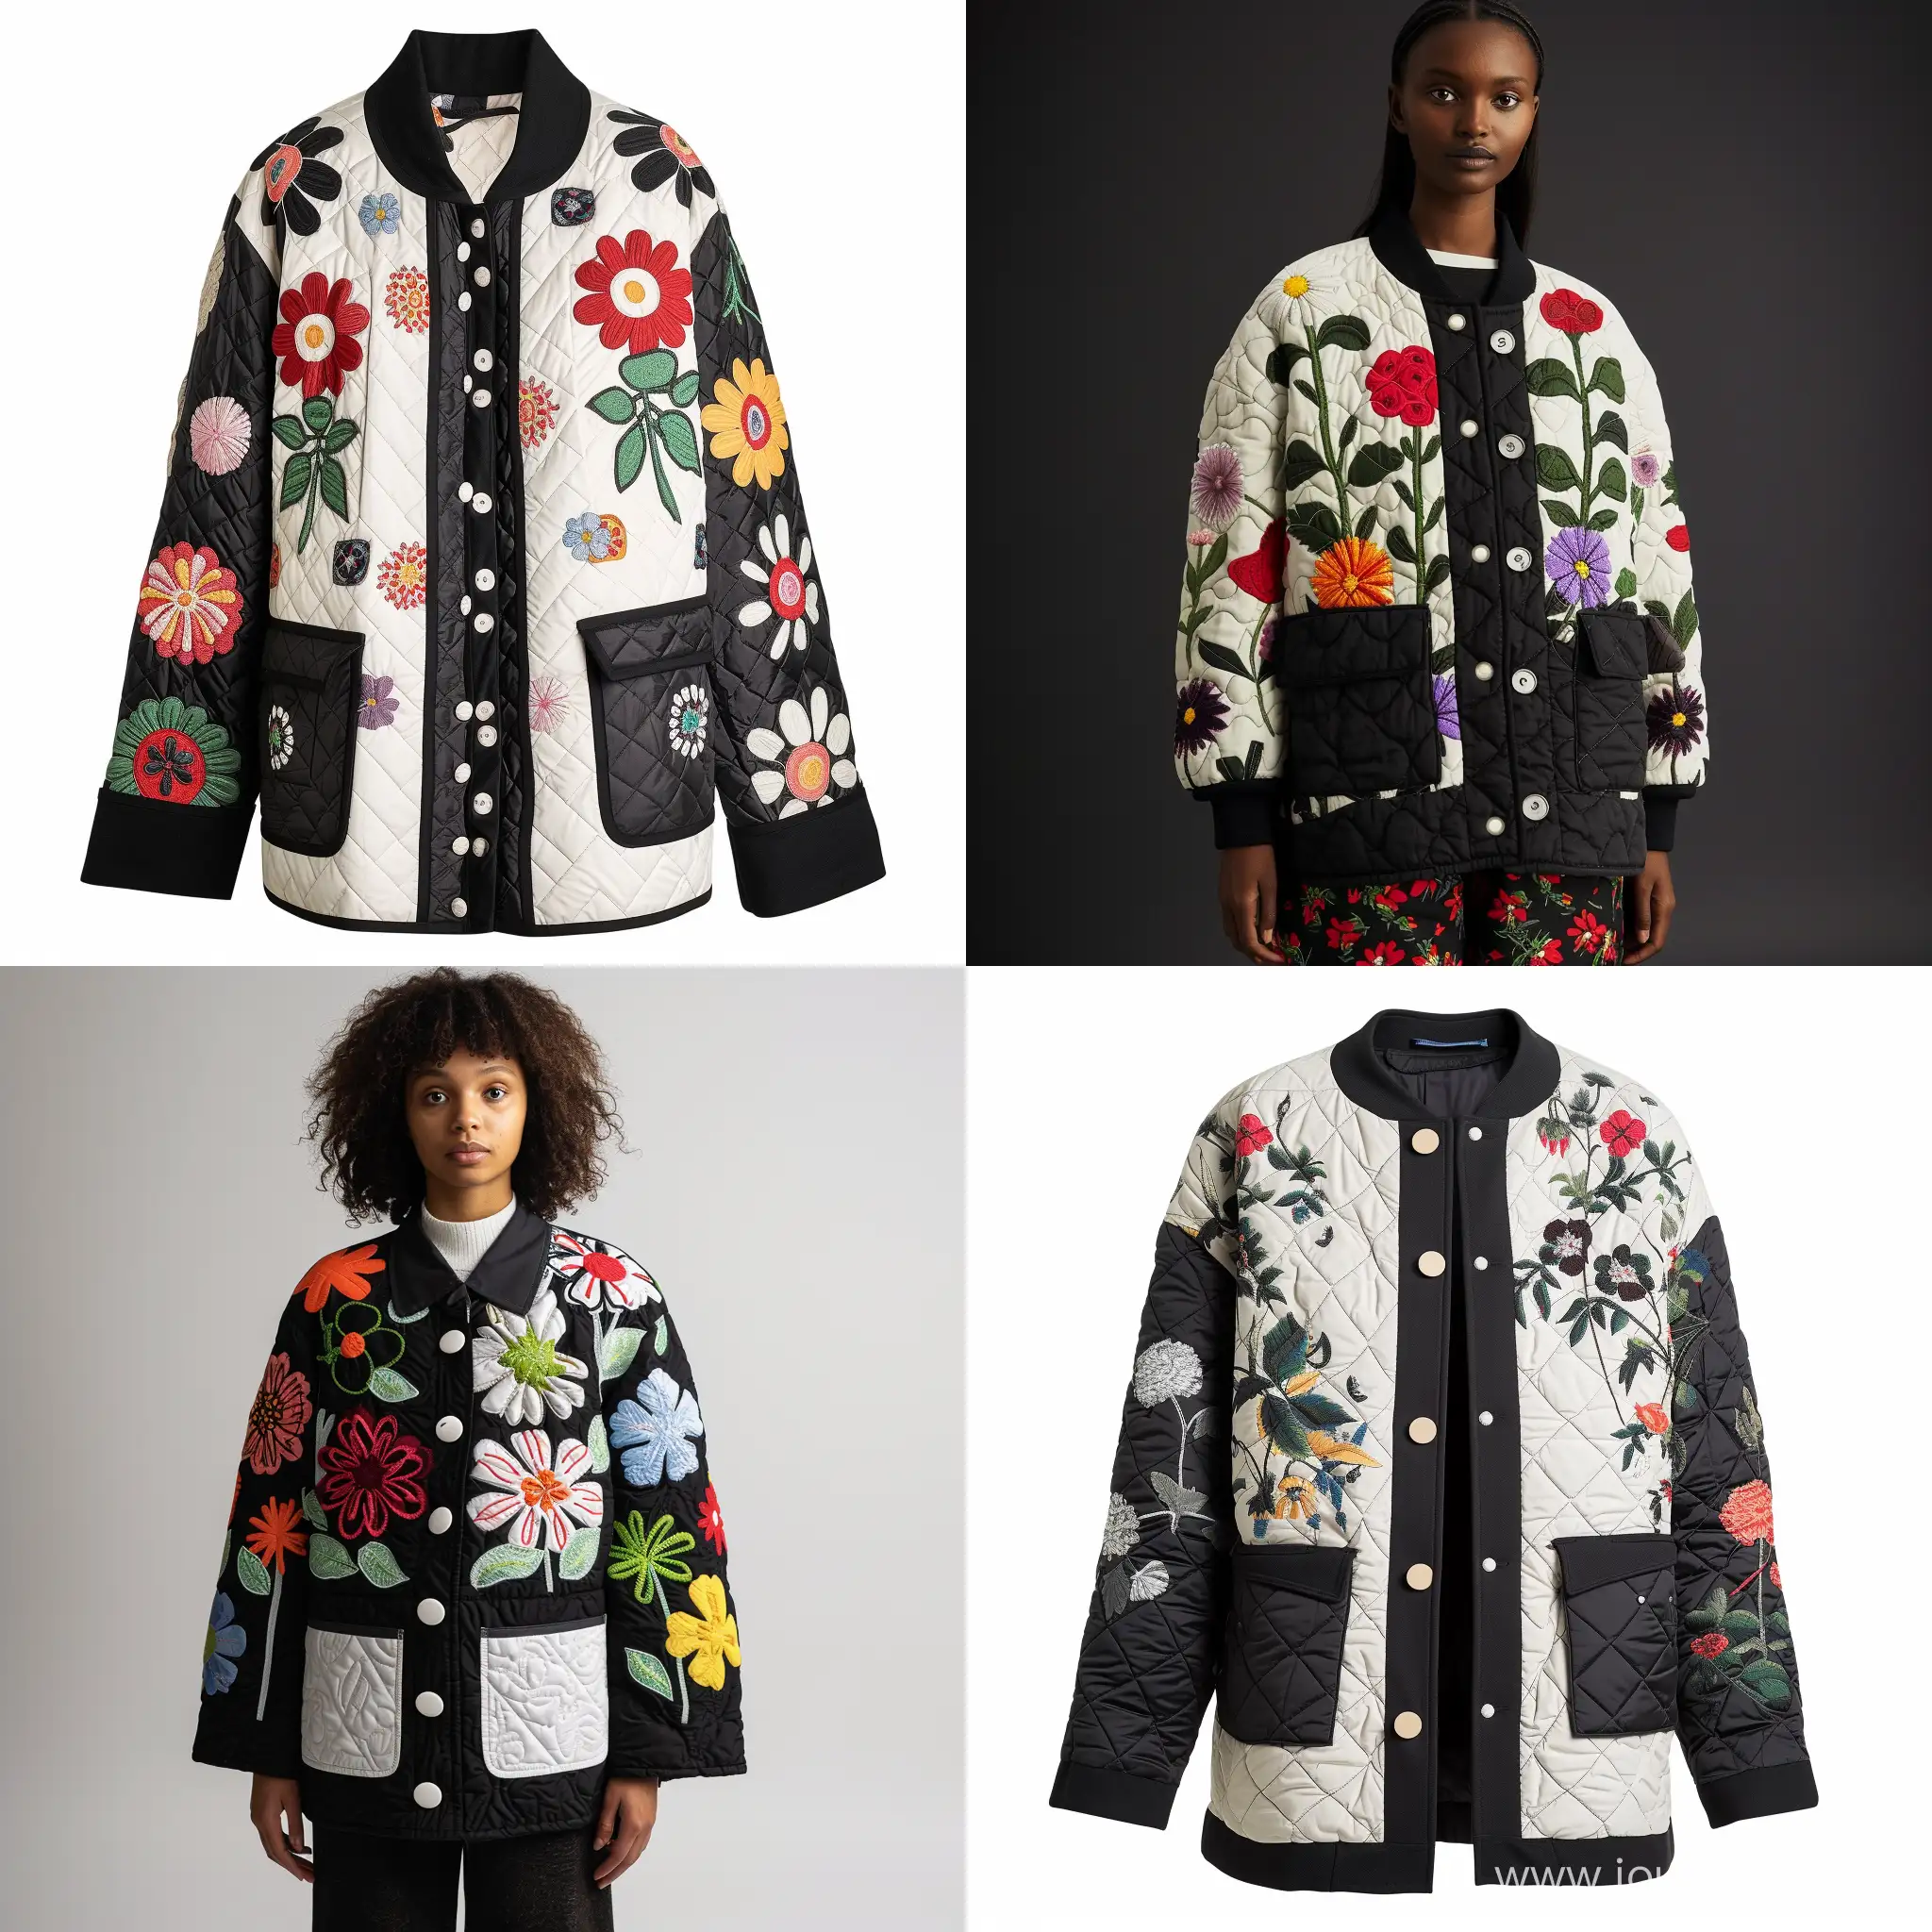 Black and white quilted jacket in an oversized fit with flower print in different colors, two big pockets and buttons down the front, made for women in Scandinavia